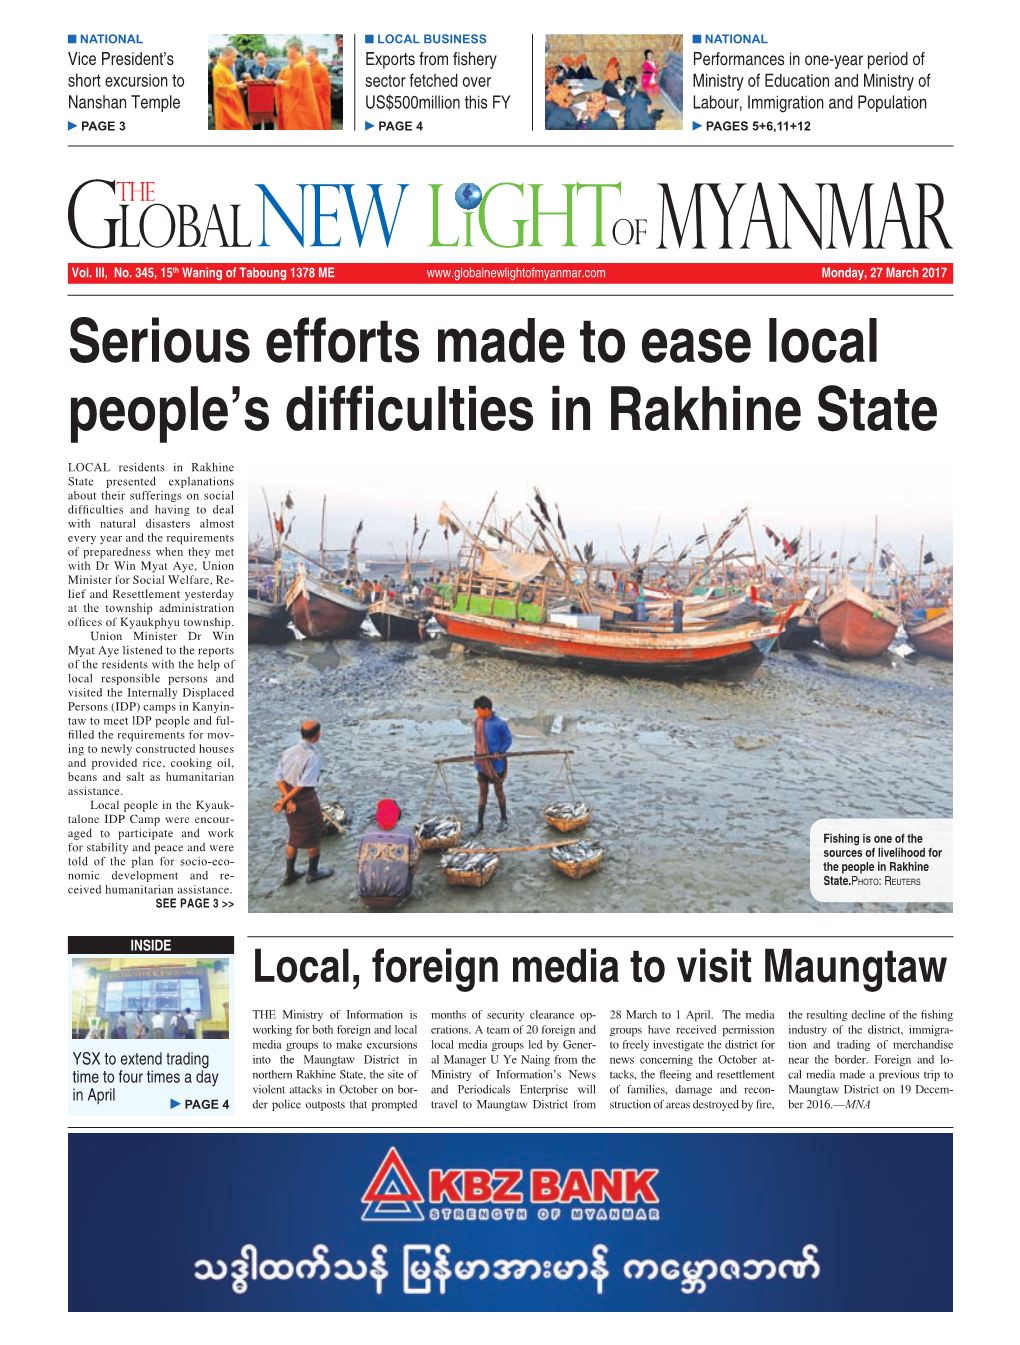 Serious Efforts Made to Ease Local People's Difficulties in Rakhine State